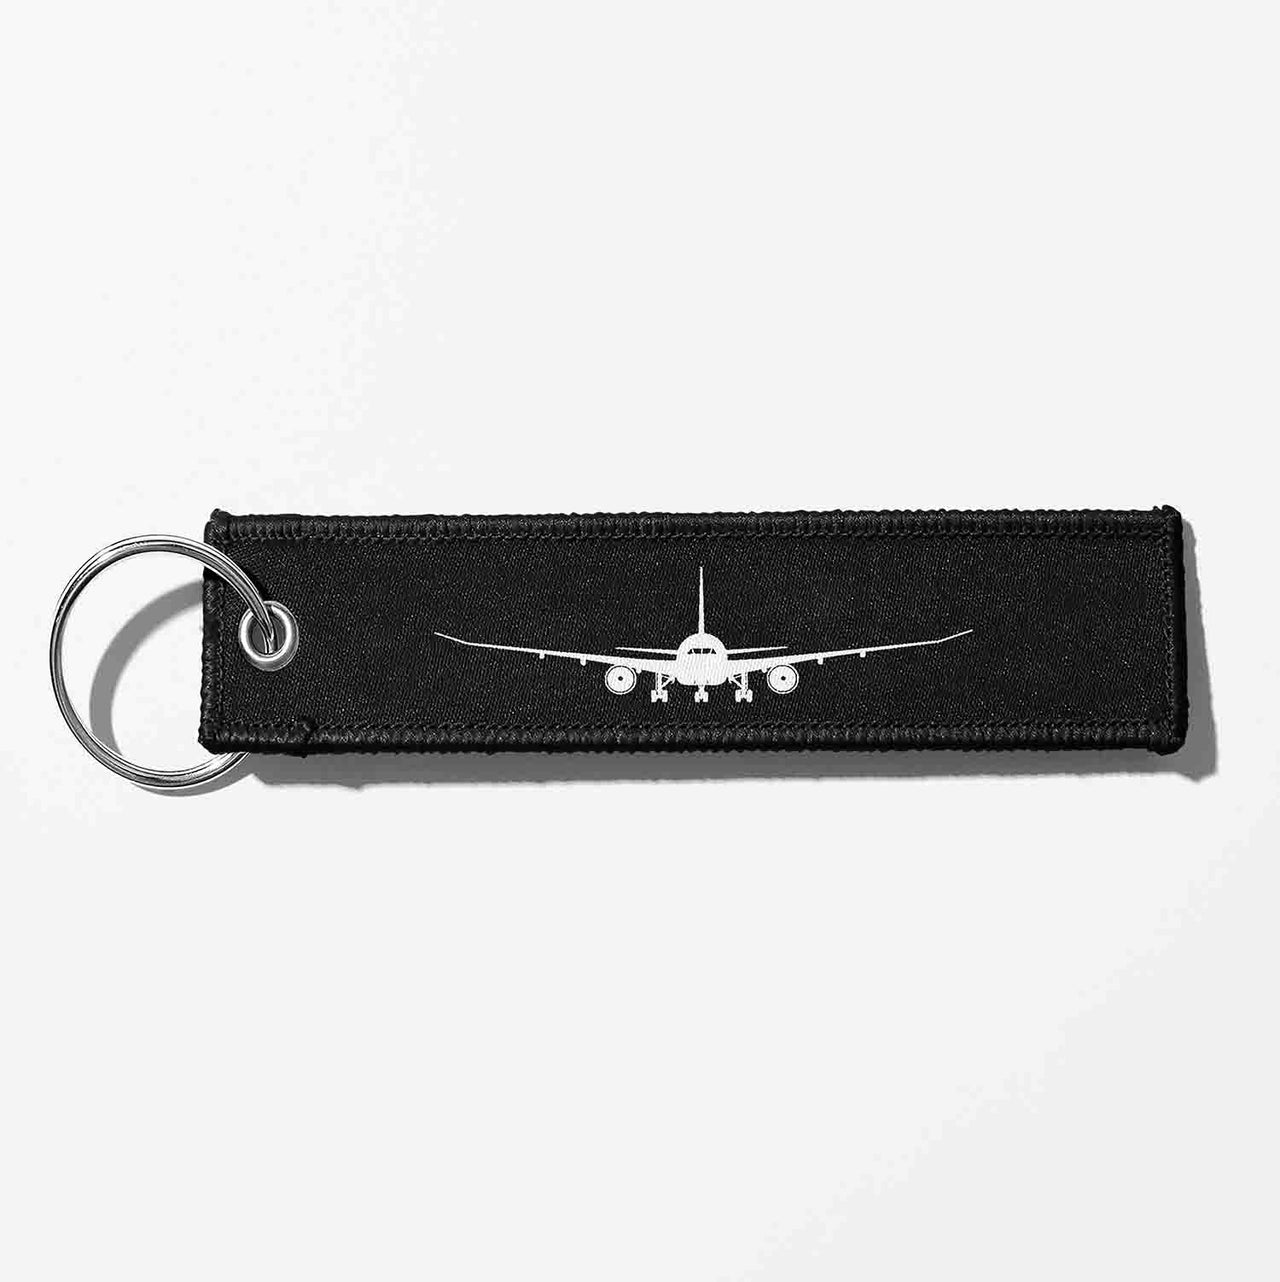 Boeing 787 Silhouette Designed Key Chains